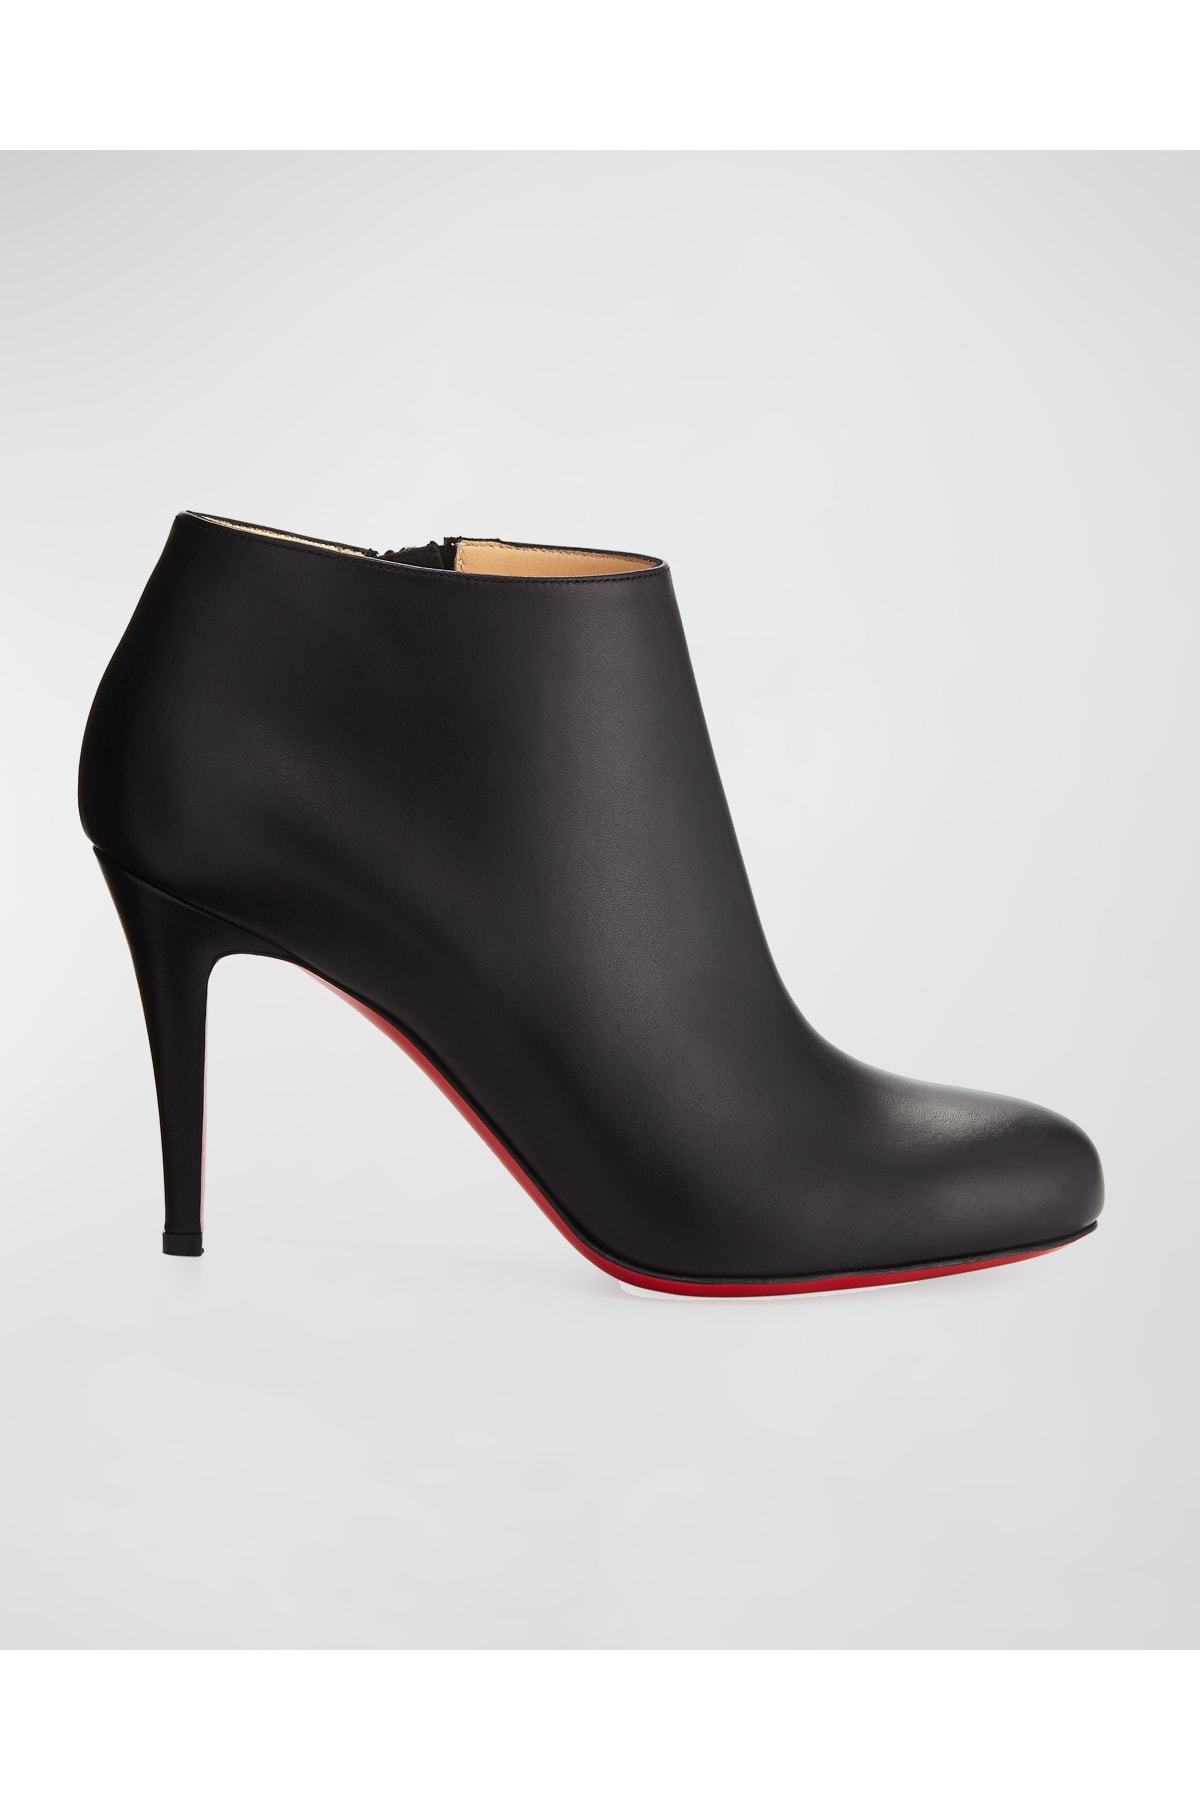 NIB Christian Louboutin BELLE 100 Leather Ankle Boots Heels Black